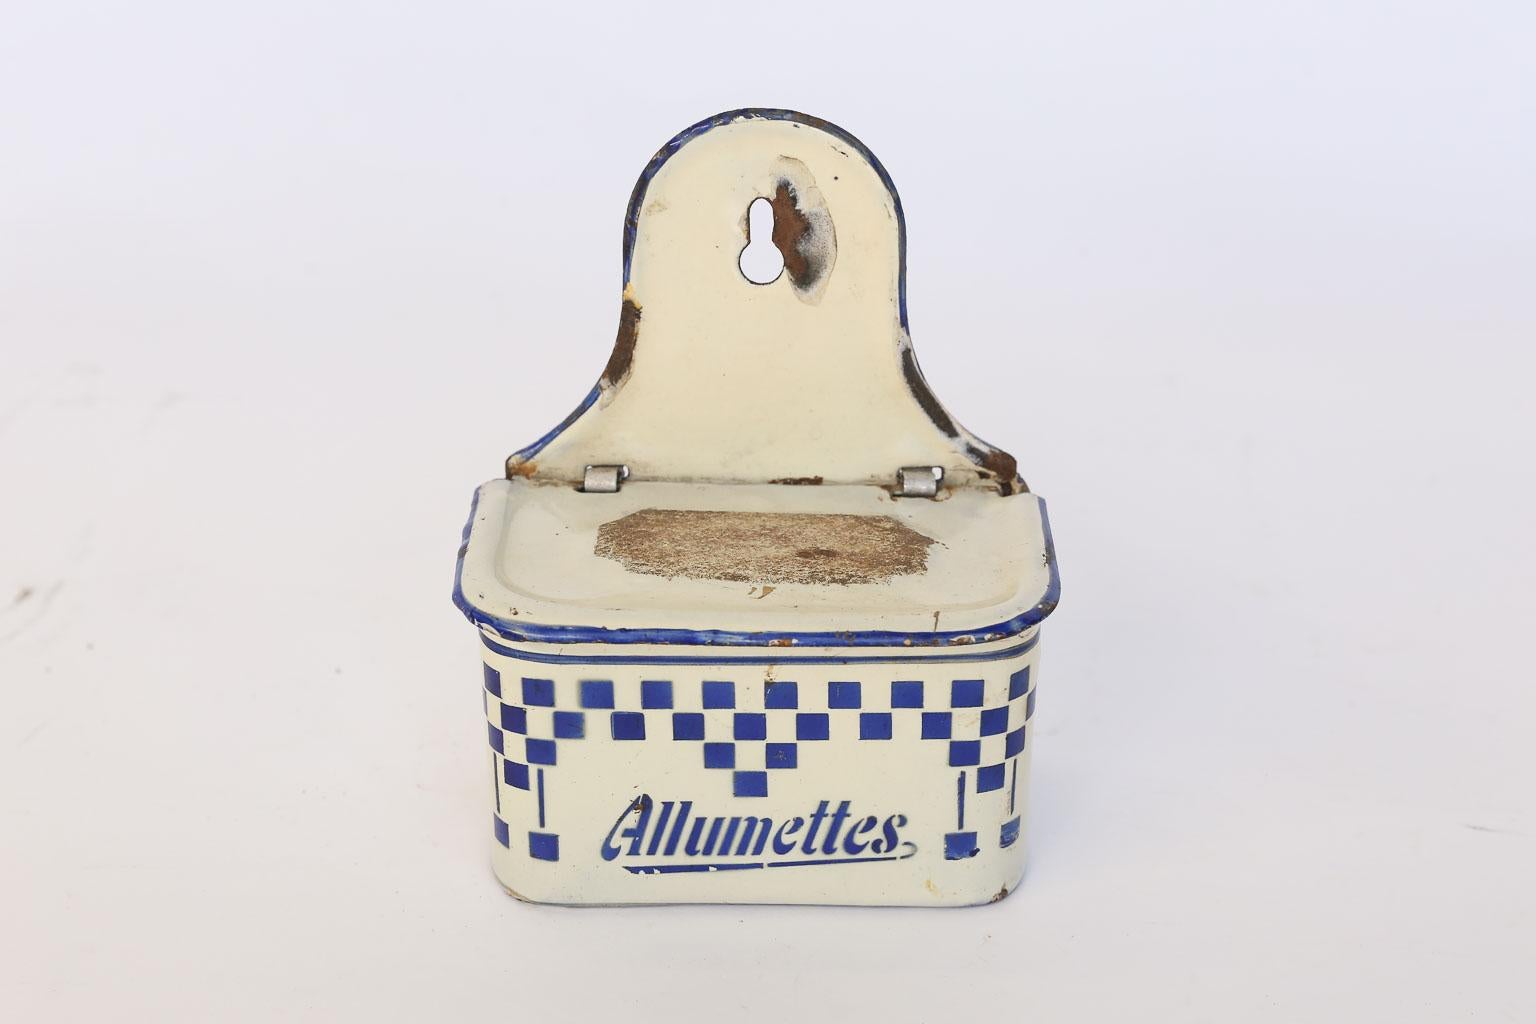 This is an antique French enamel match holder and striker made in the early 1900s. This piece can be wall-mounted or sit alone on a counter or tabletop. The lid has a strike patch on the top for lighting matches and lifts to reveal the stored